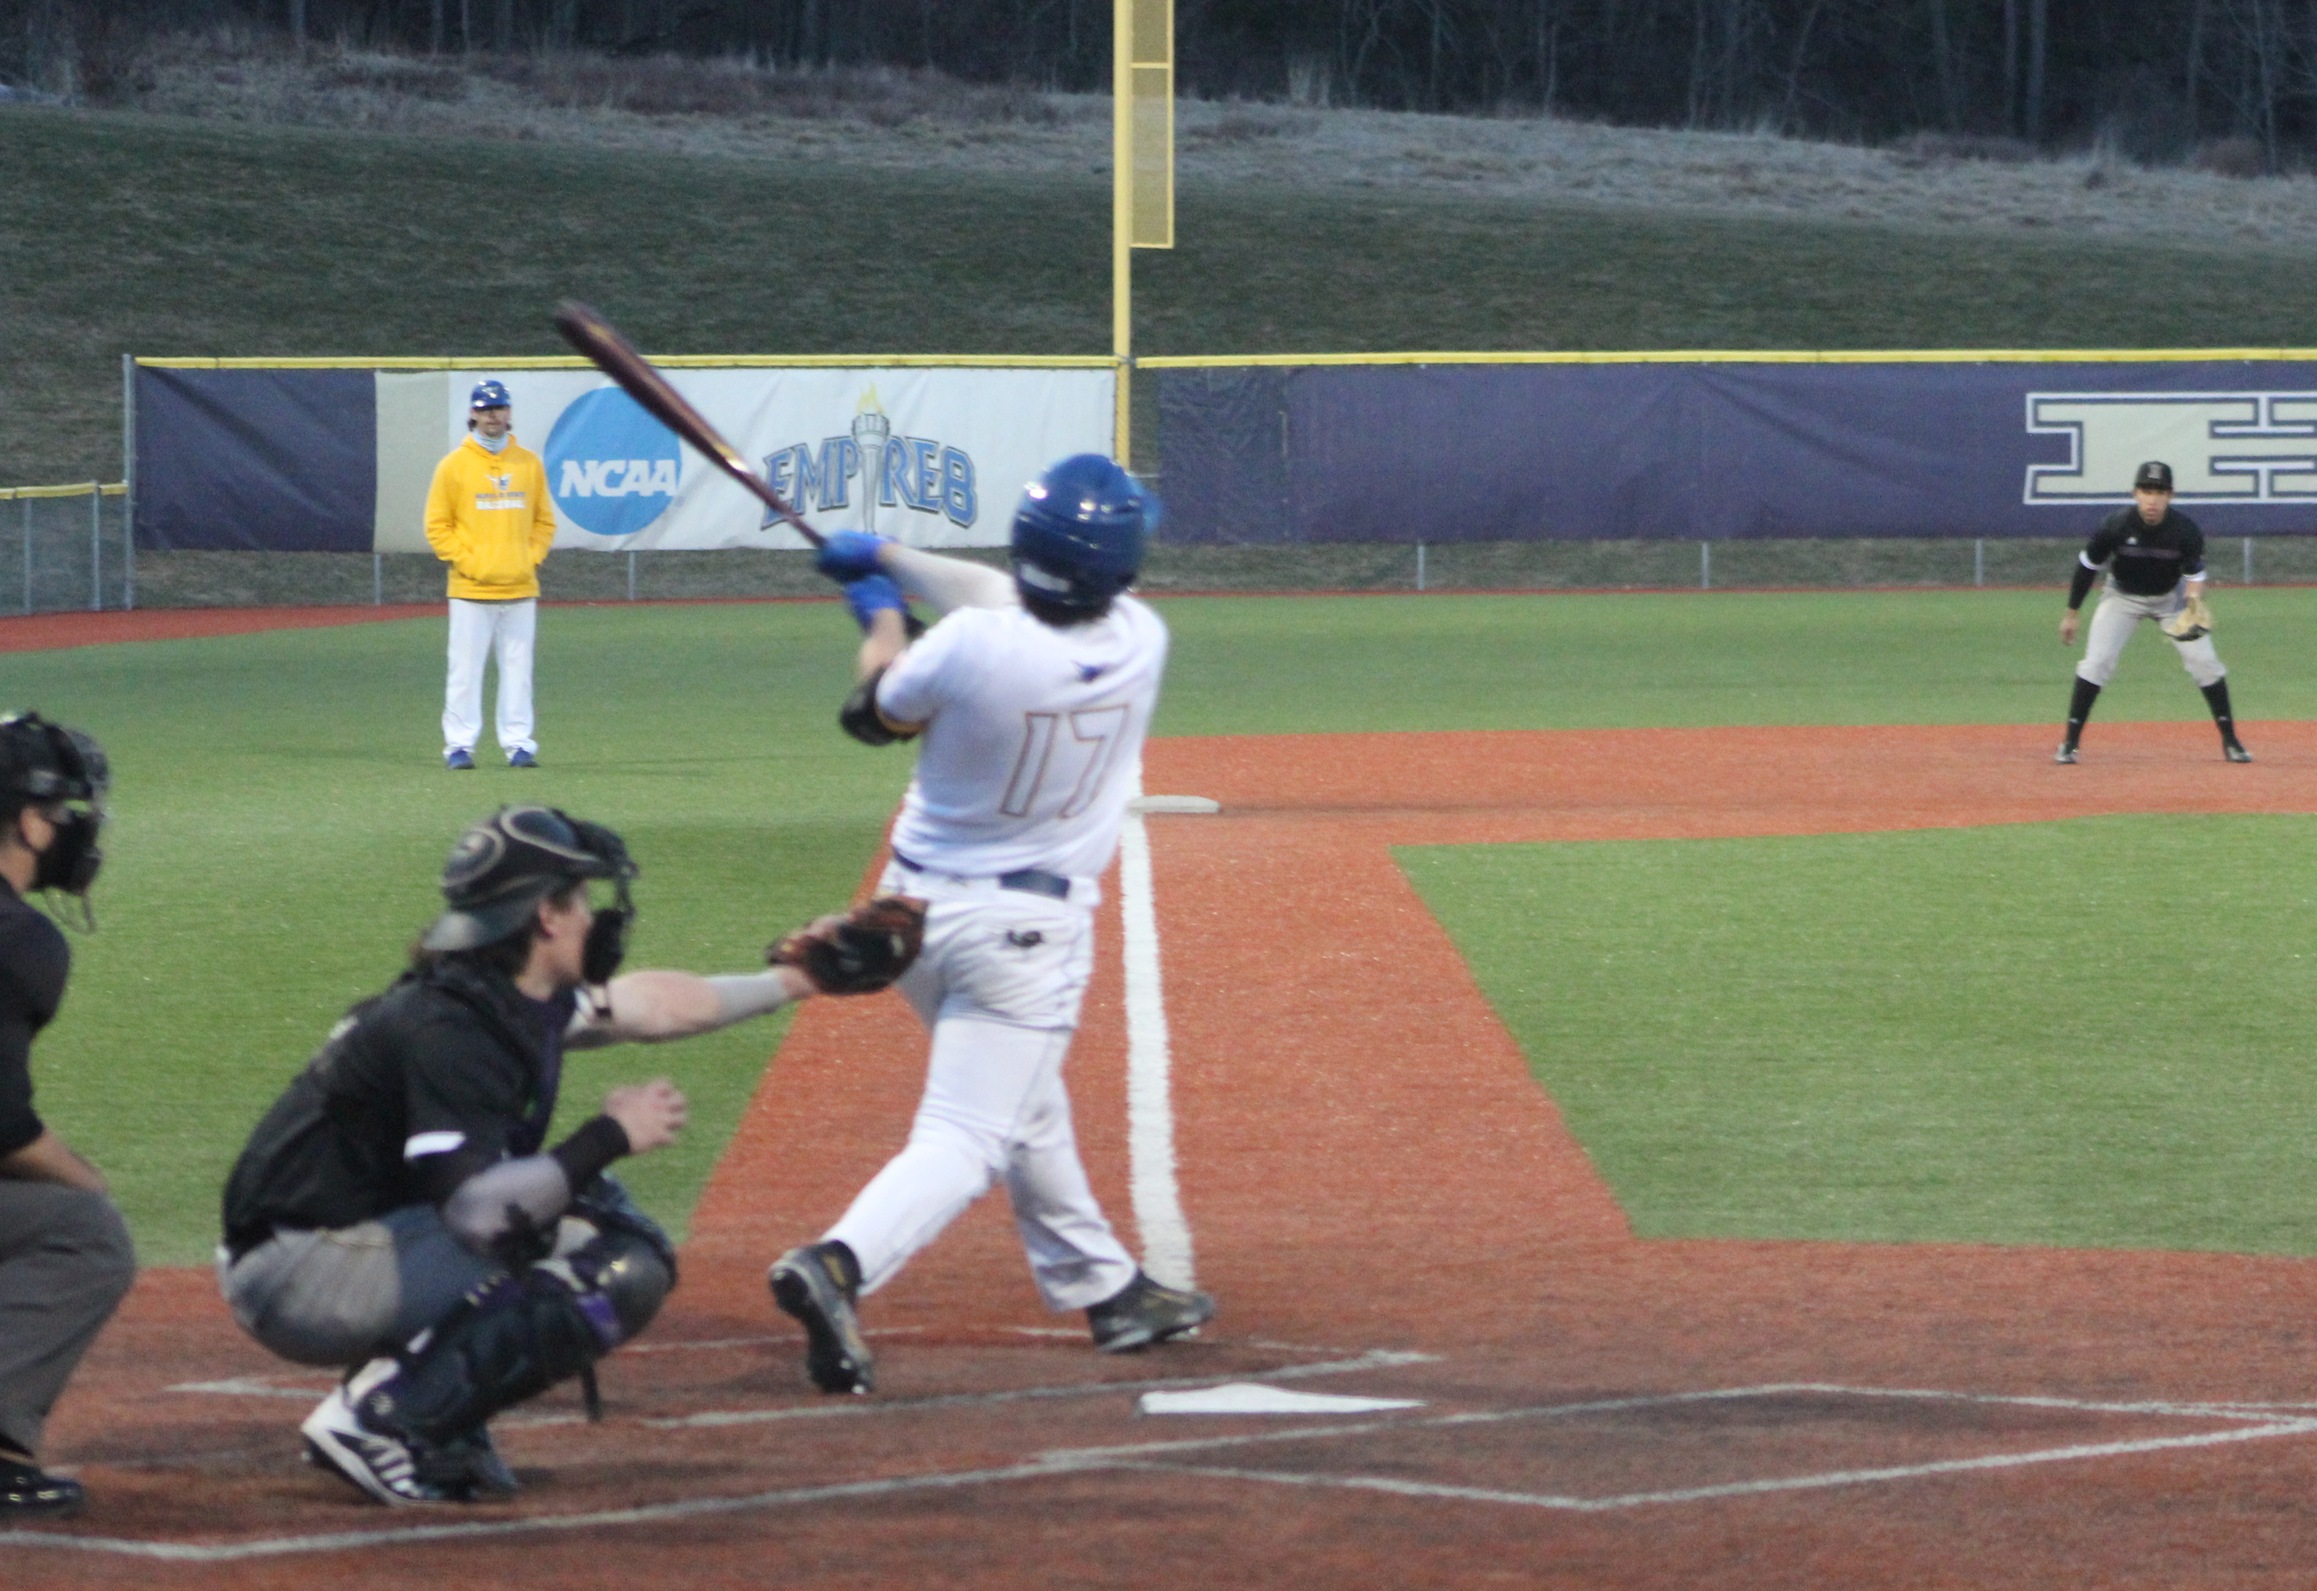 Moore Records Three RBIs in Doubleheader with Allegheny